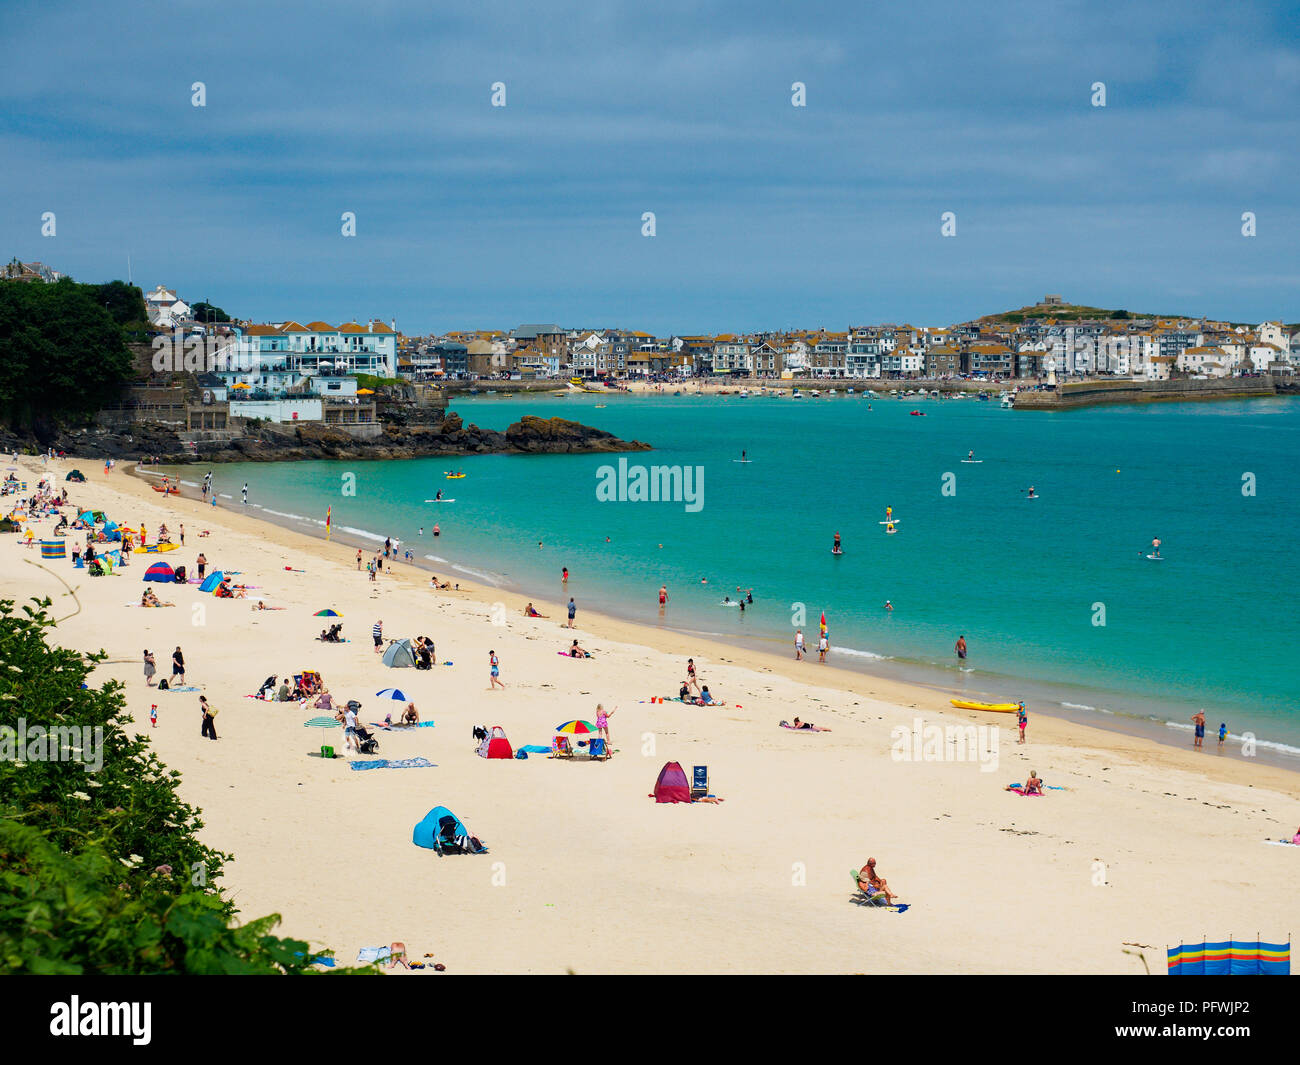 Porthminster Beach S Ives Harbour Cornwall Looking towards the Harbour July 2018 Stock Photo